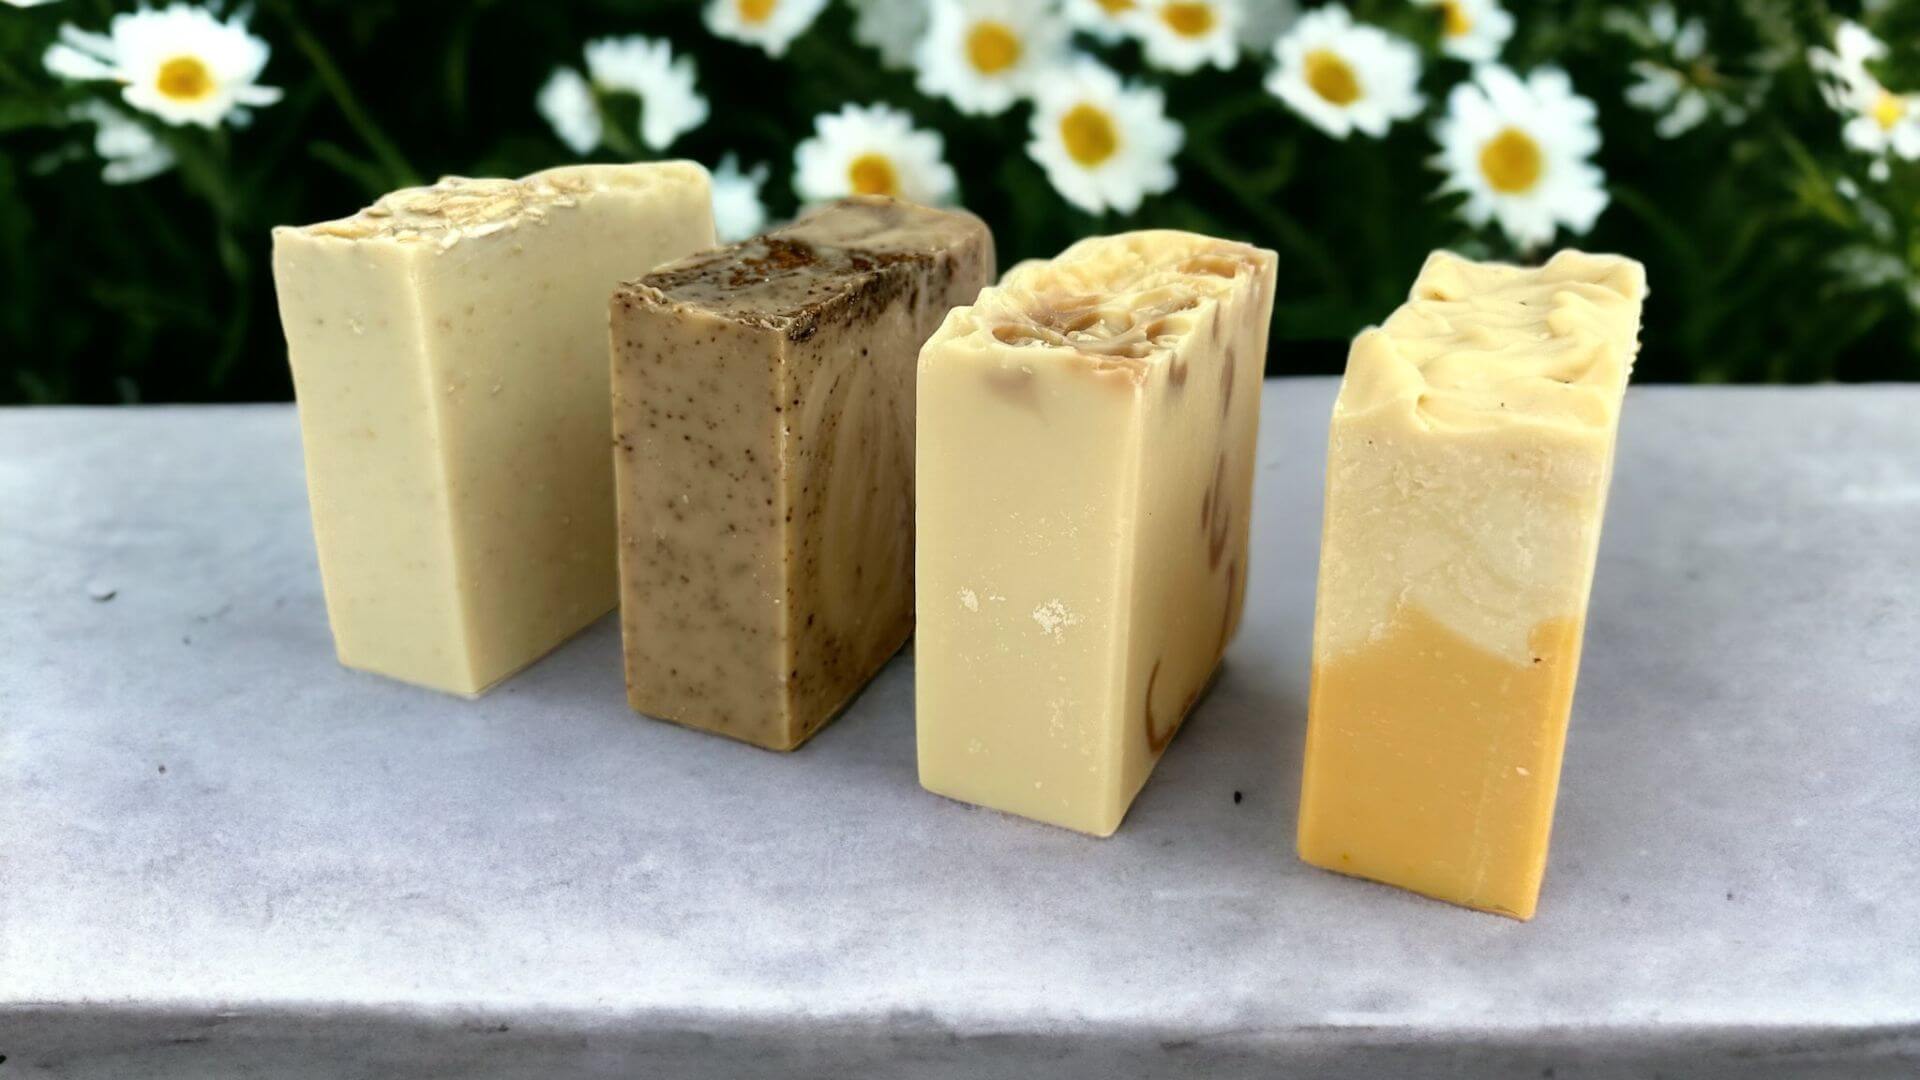 Collombatti Naturals 5 ways to reduce waste over christmas picture of handmade goats milk soap